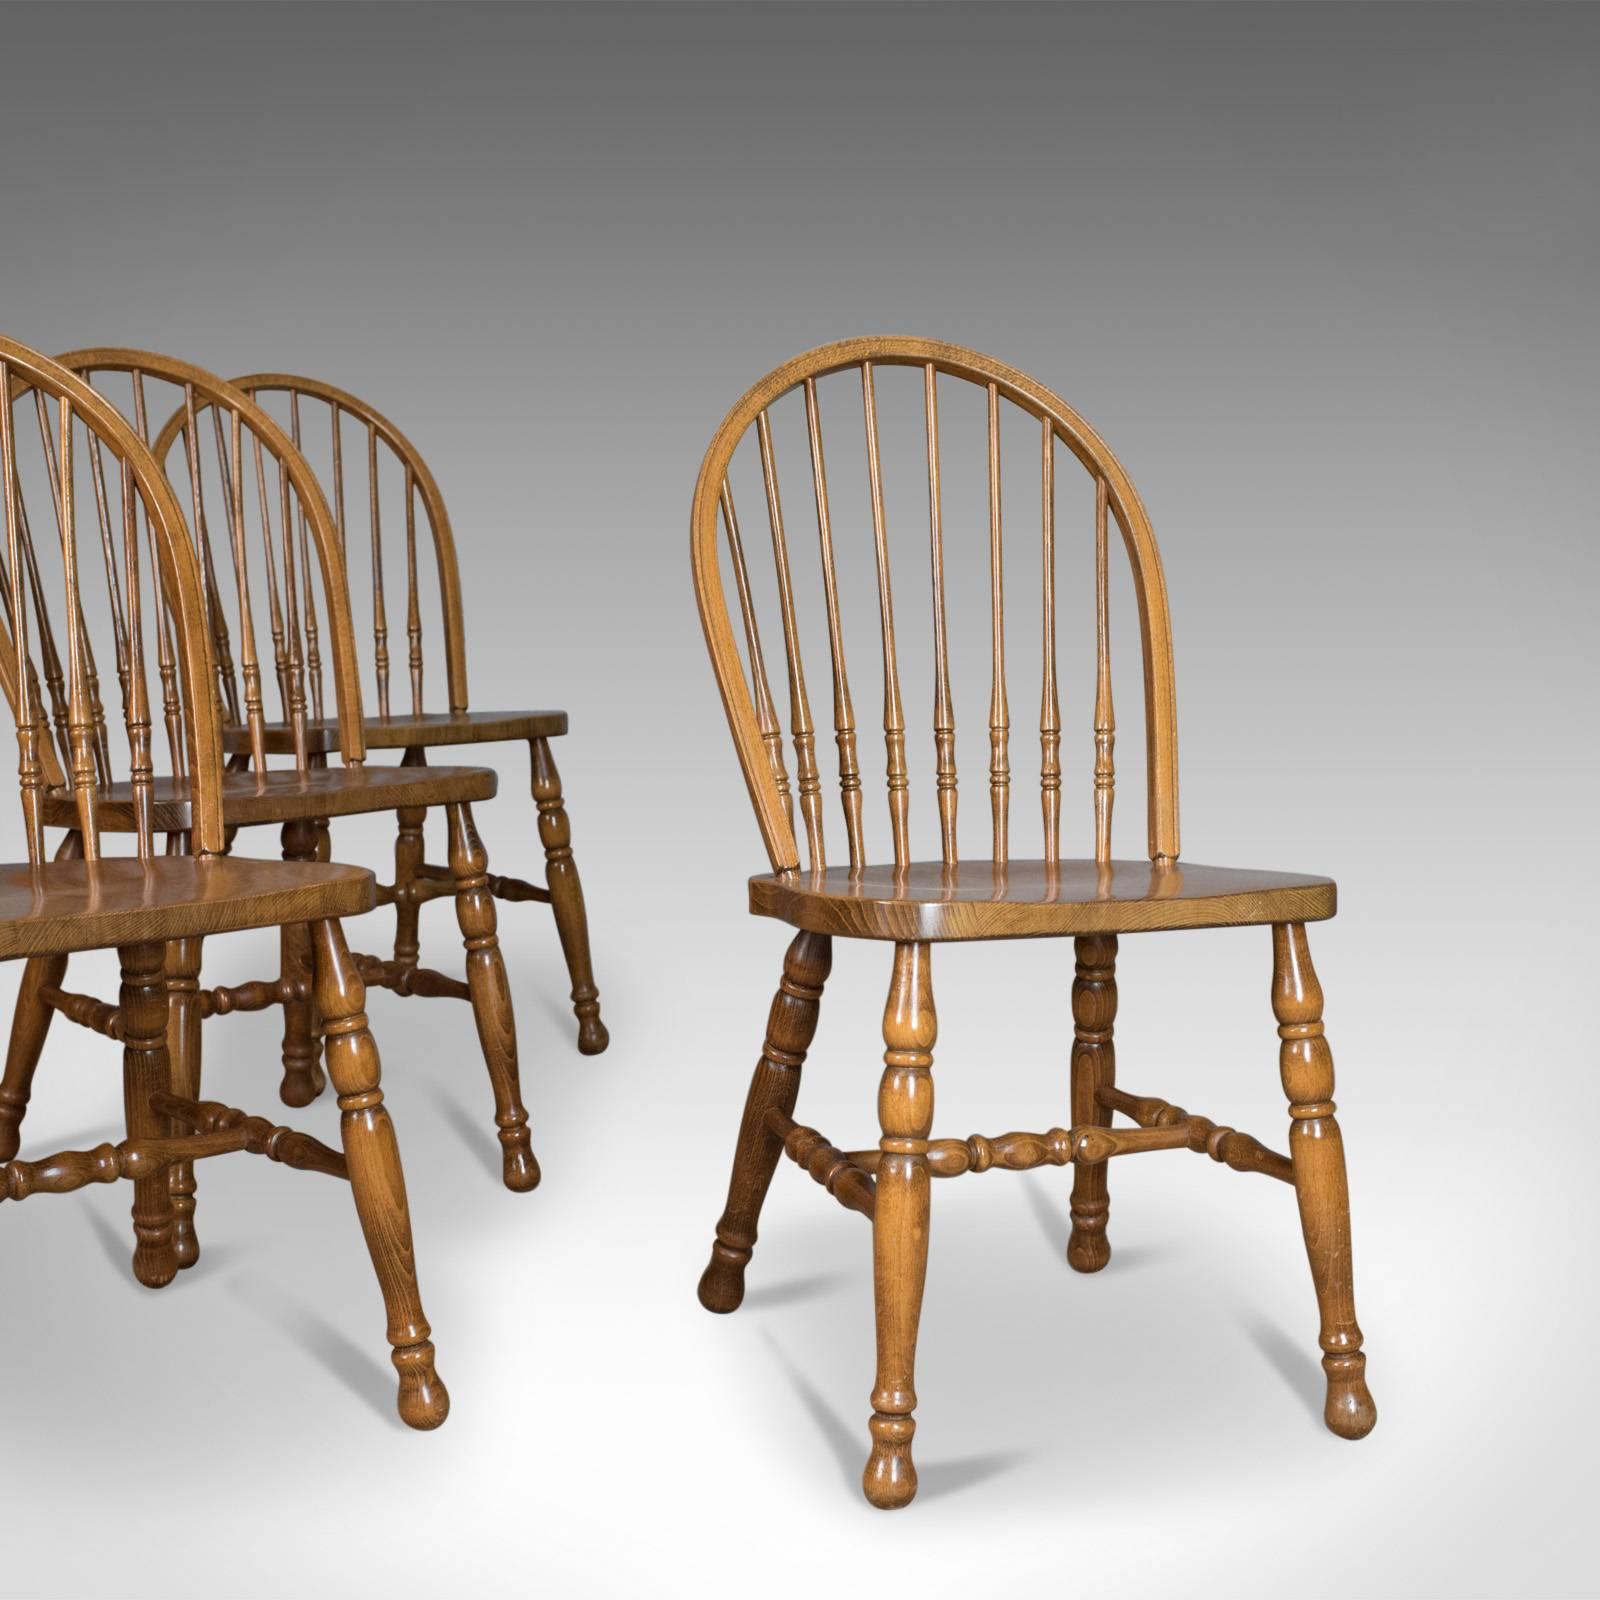 This is a set of four dining chairs, French Provincial hoop stick back chairs in beech from the late 20th century.

Attractive set of French farmhouse country kitchen chairs
Of quality construction displaying well with a wax polished